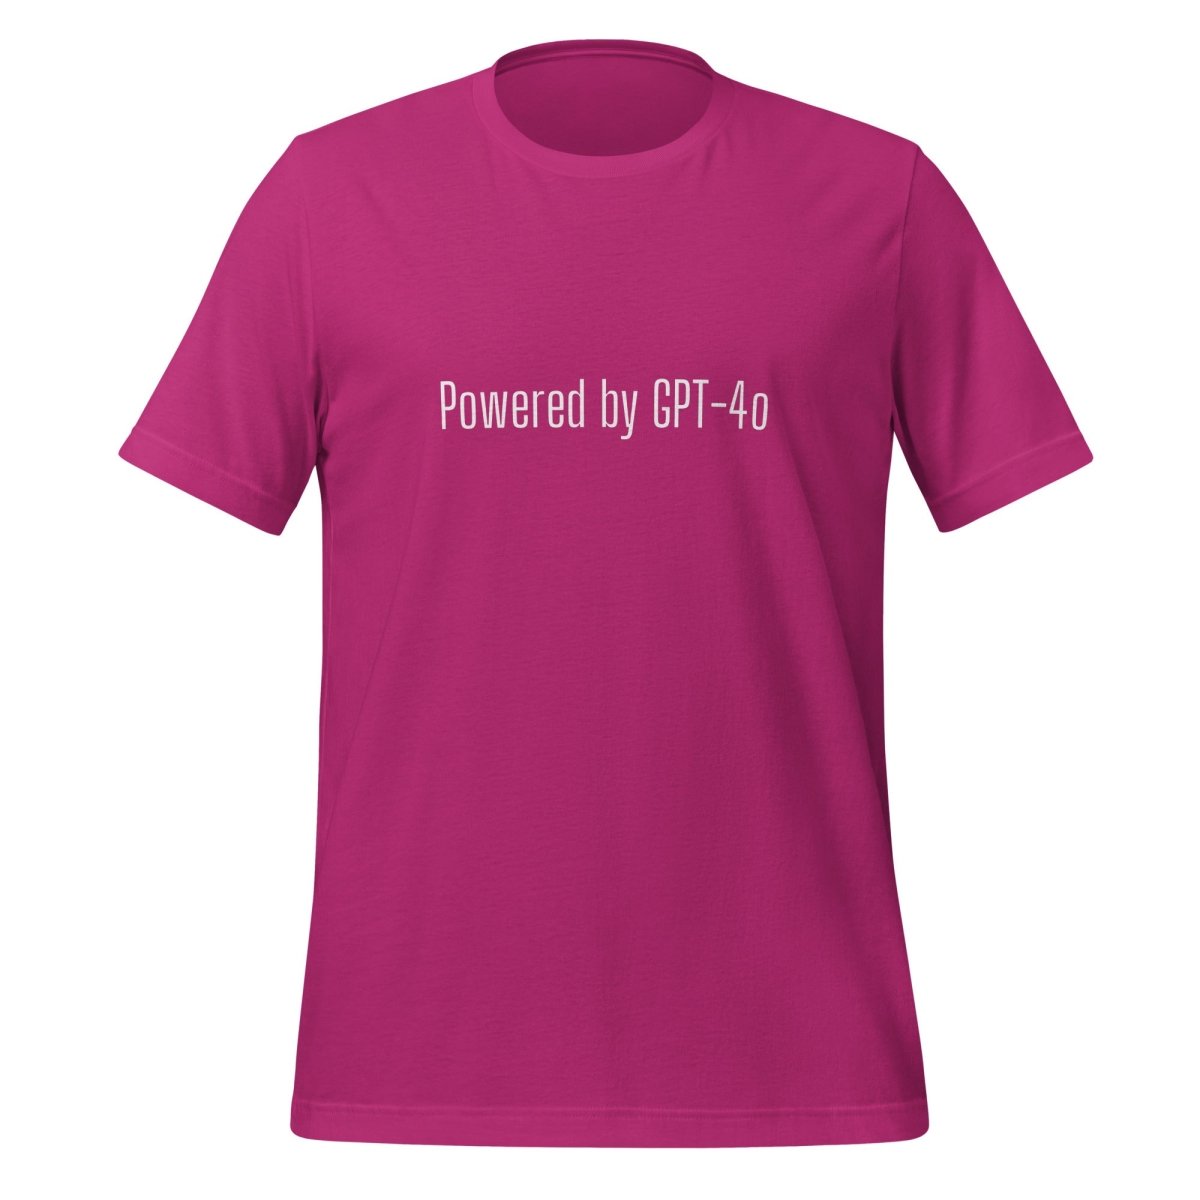 Powered by GPT - 4o T - Shirt 4 (unisex) - Berry - AI Store